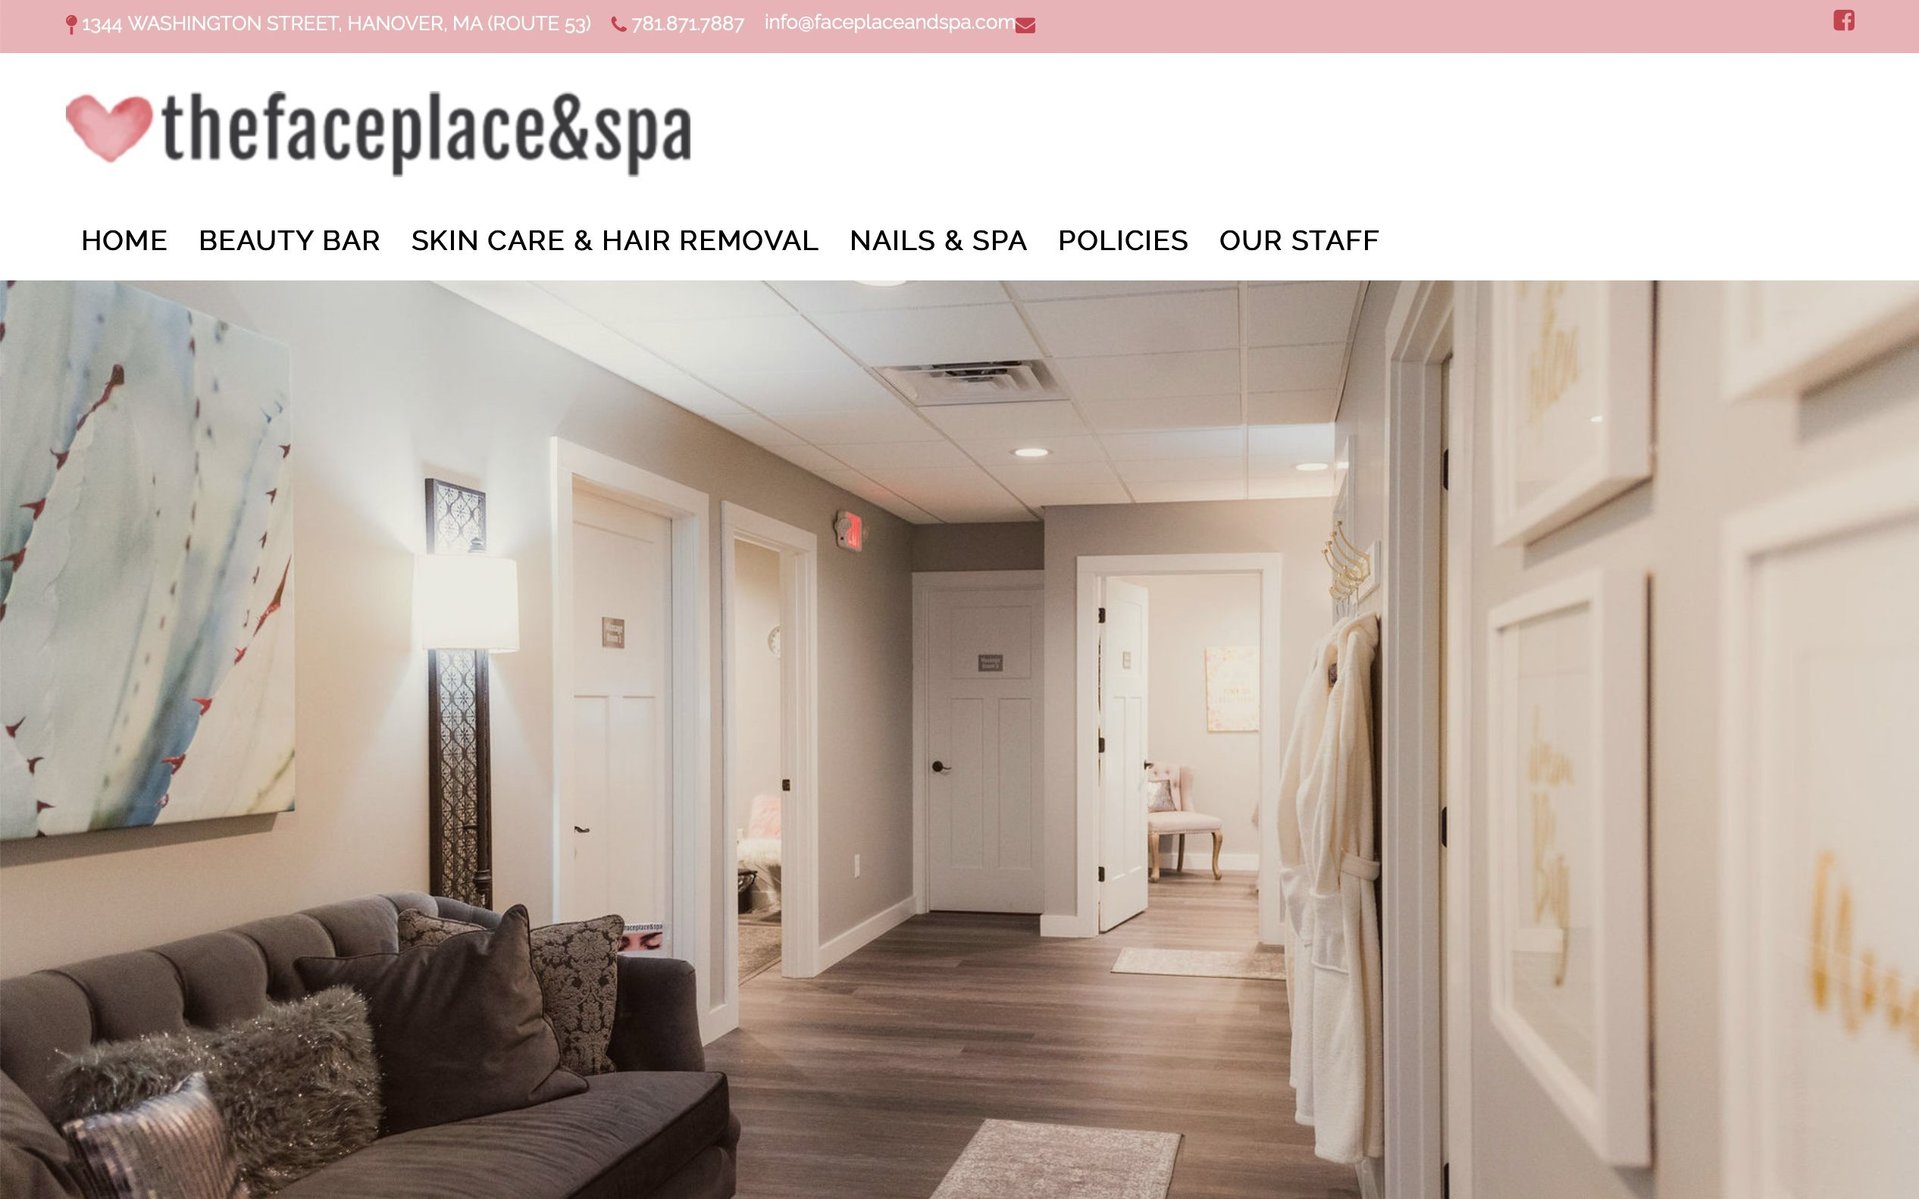 Splash page for thefaceplace spa by Boston commercial photographer Lisa Czech